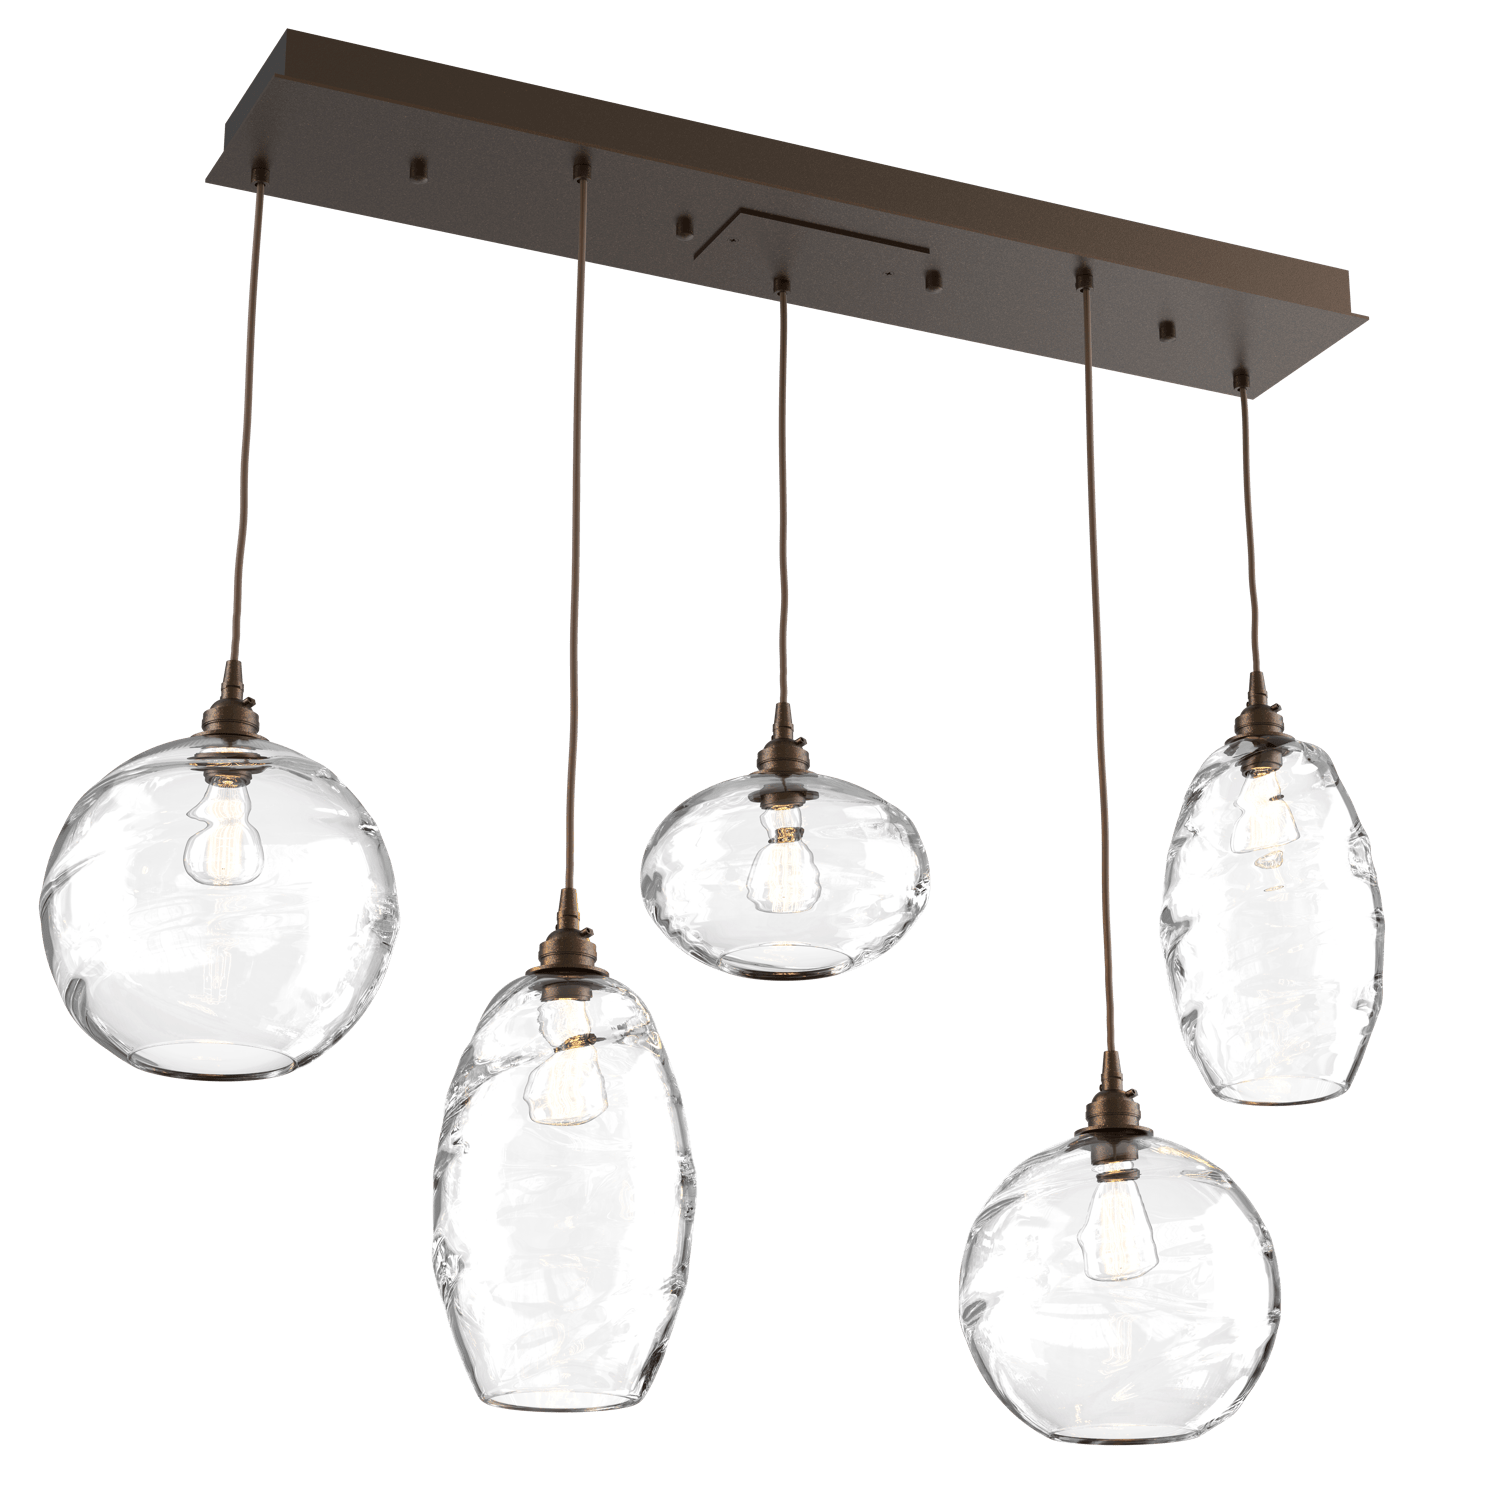 PLB0048-05-FB-OC-Hammerton-Studio-Optic-Blown-Glass-Misto-5-light-linear-pendant-chandelier-with-flat-bronze-finish-and-optic-clear-blown-glass-shades-and-incandescent-lamping